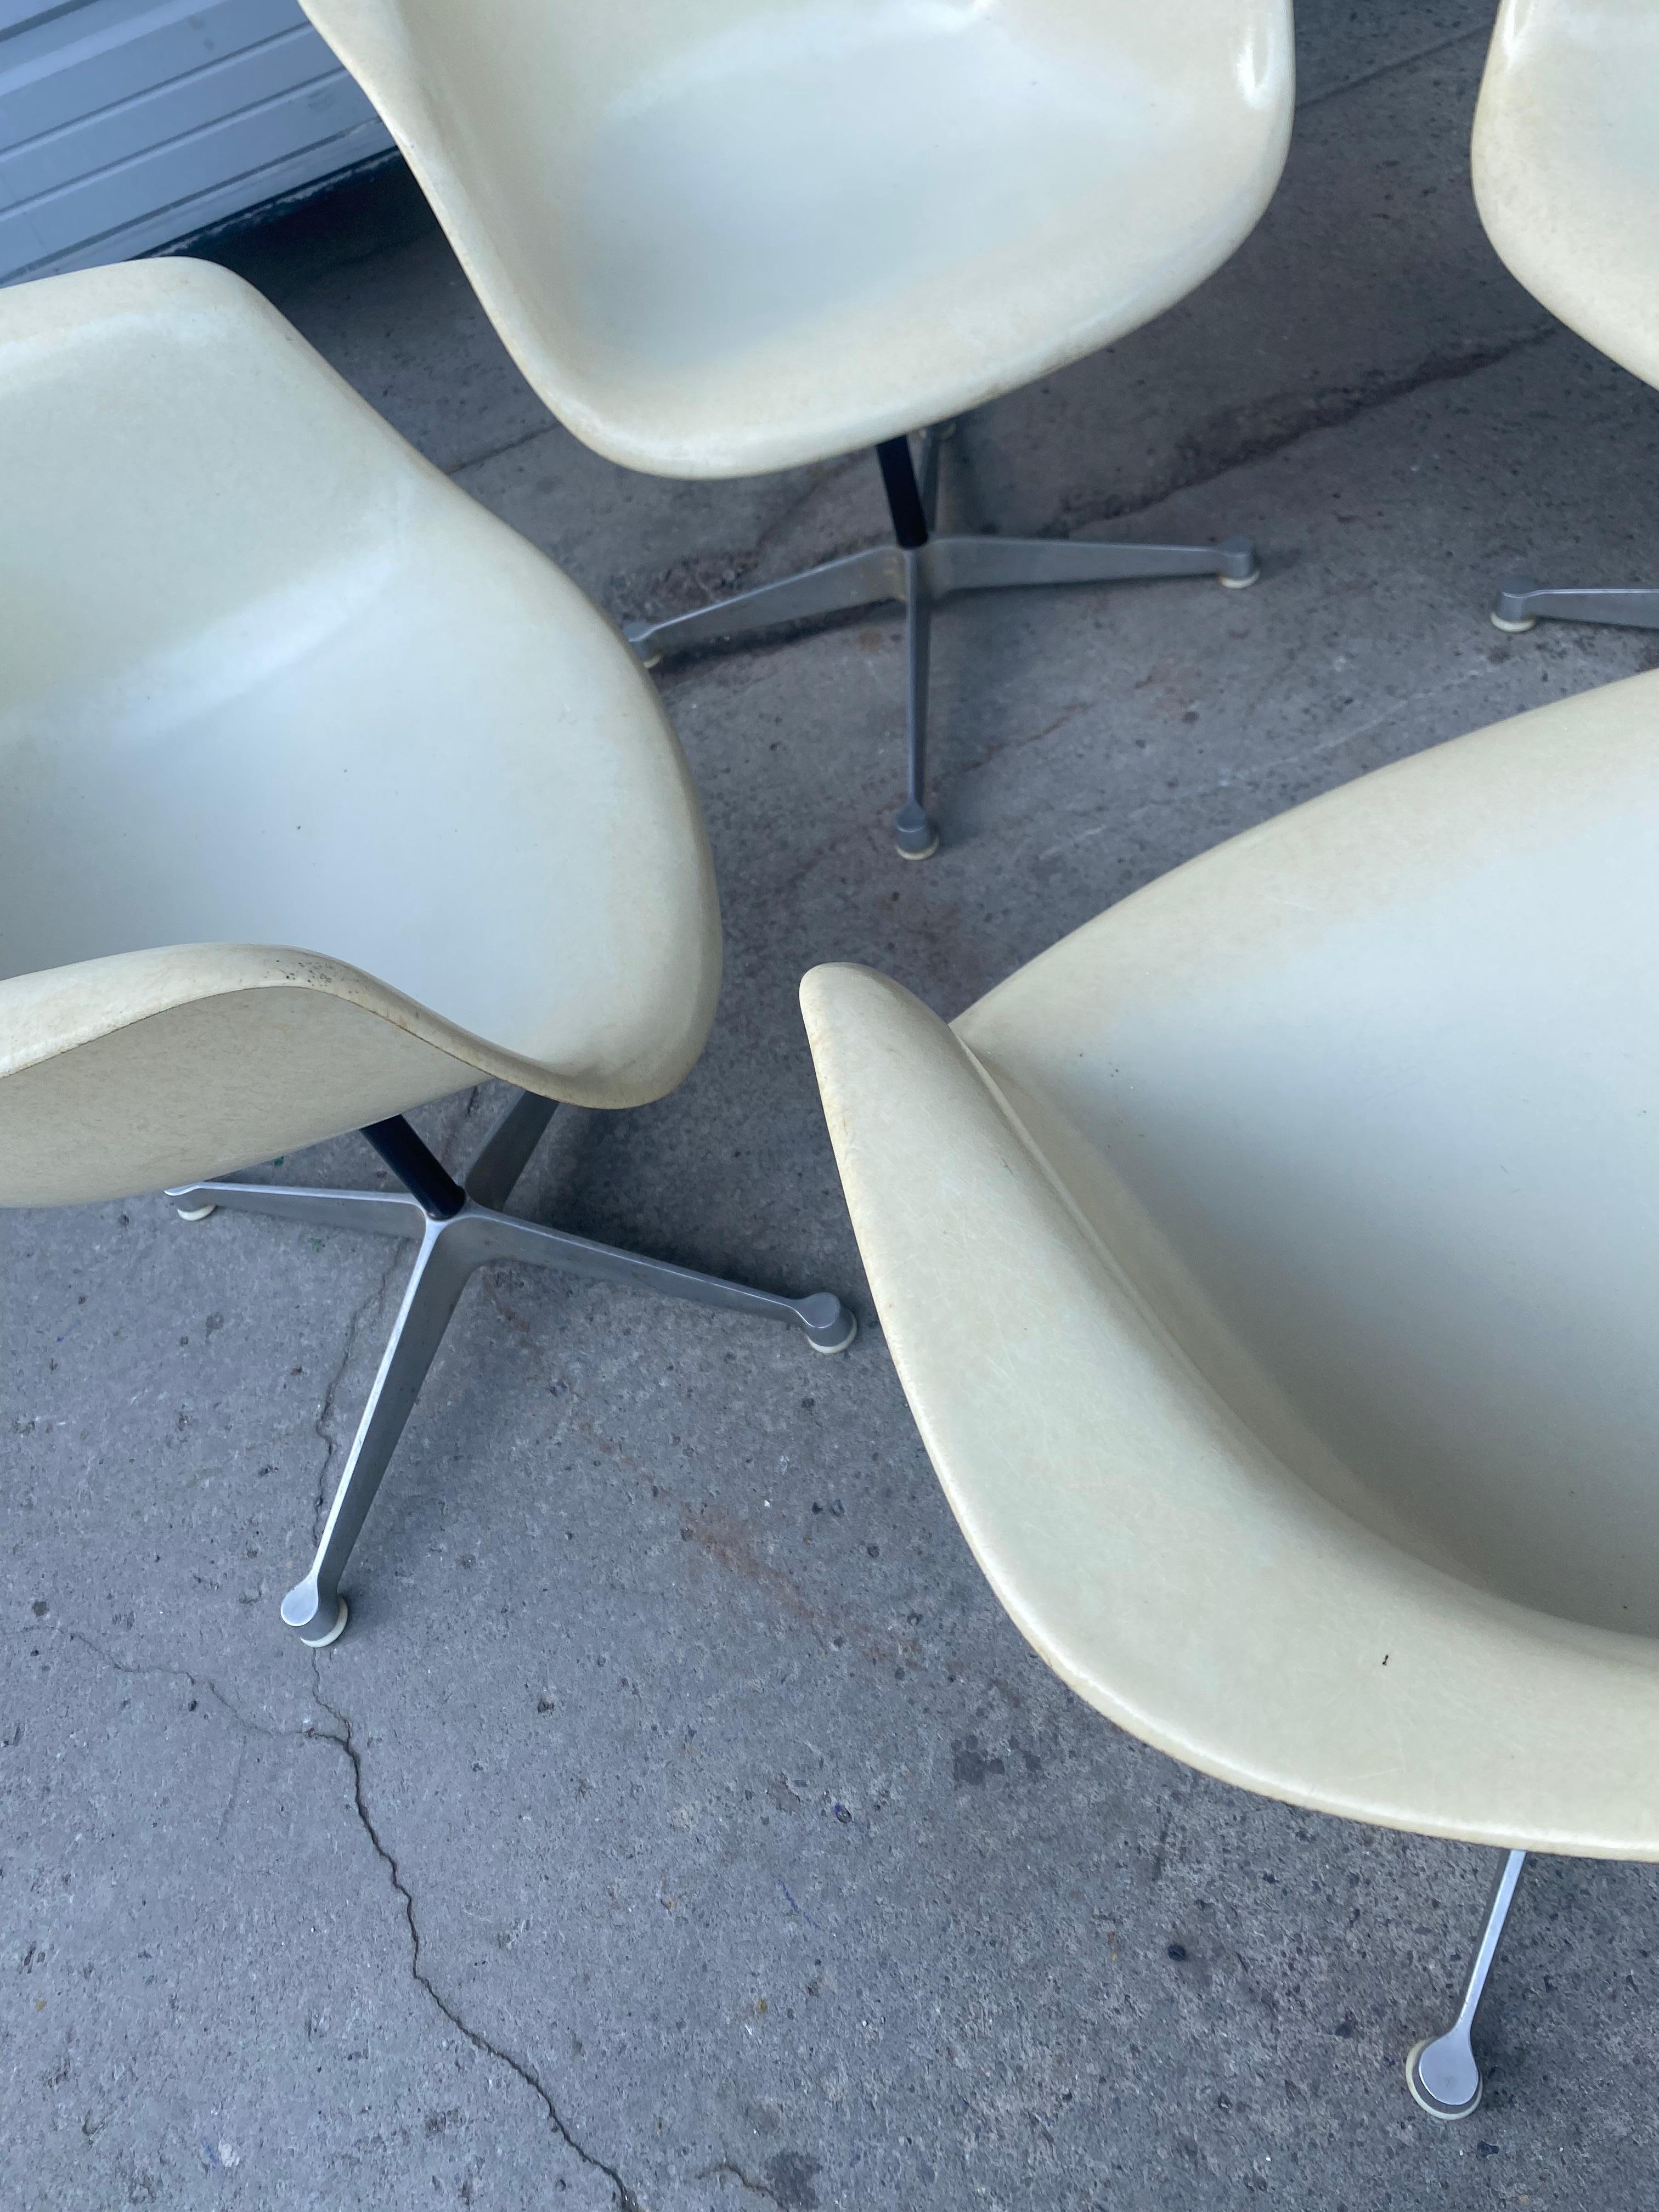  iconic design classic from the Mid-Century Modern period. This vintage fiberglass shell chair was designed by Charles Eames and produced by Herman Miller, 1960s,,, Amazing original condition,,. Classic ,,elegant white  These chairs are sold with